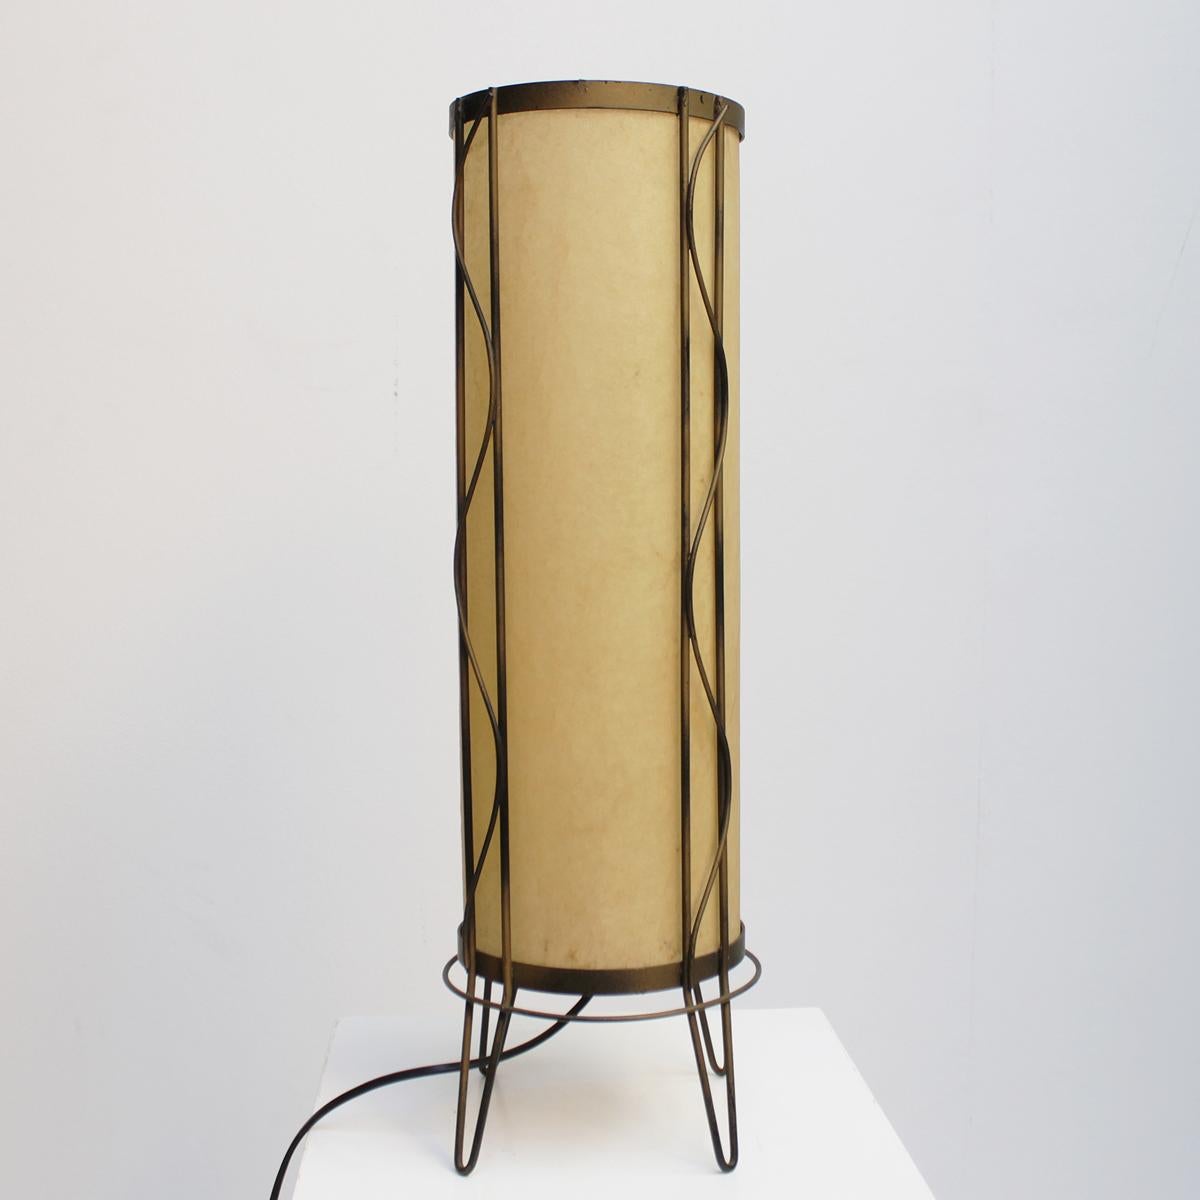 American Midcentury Table Lamp in the Manner of Paul Mayén